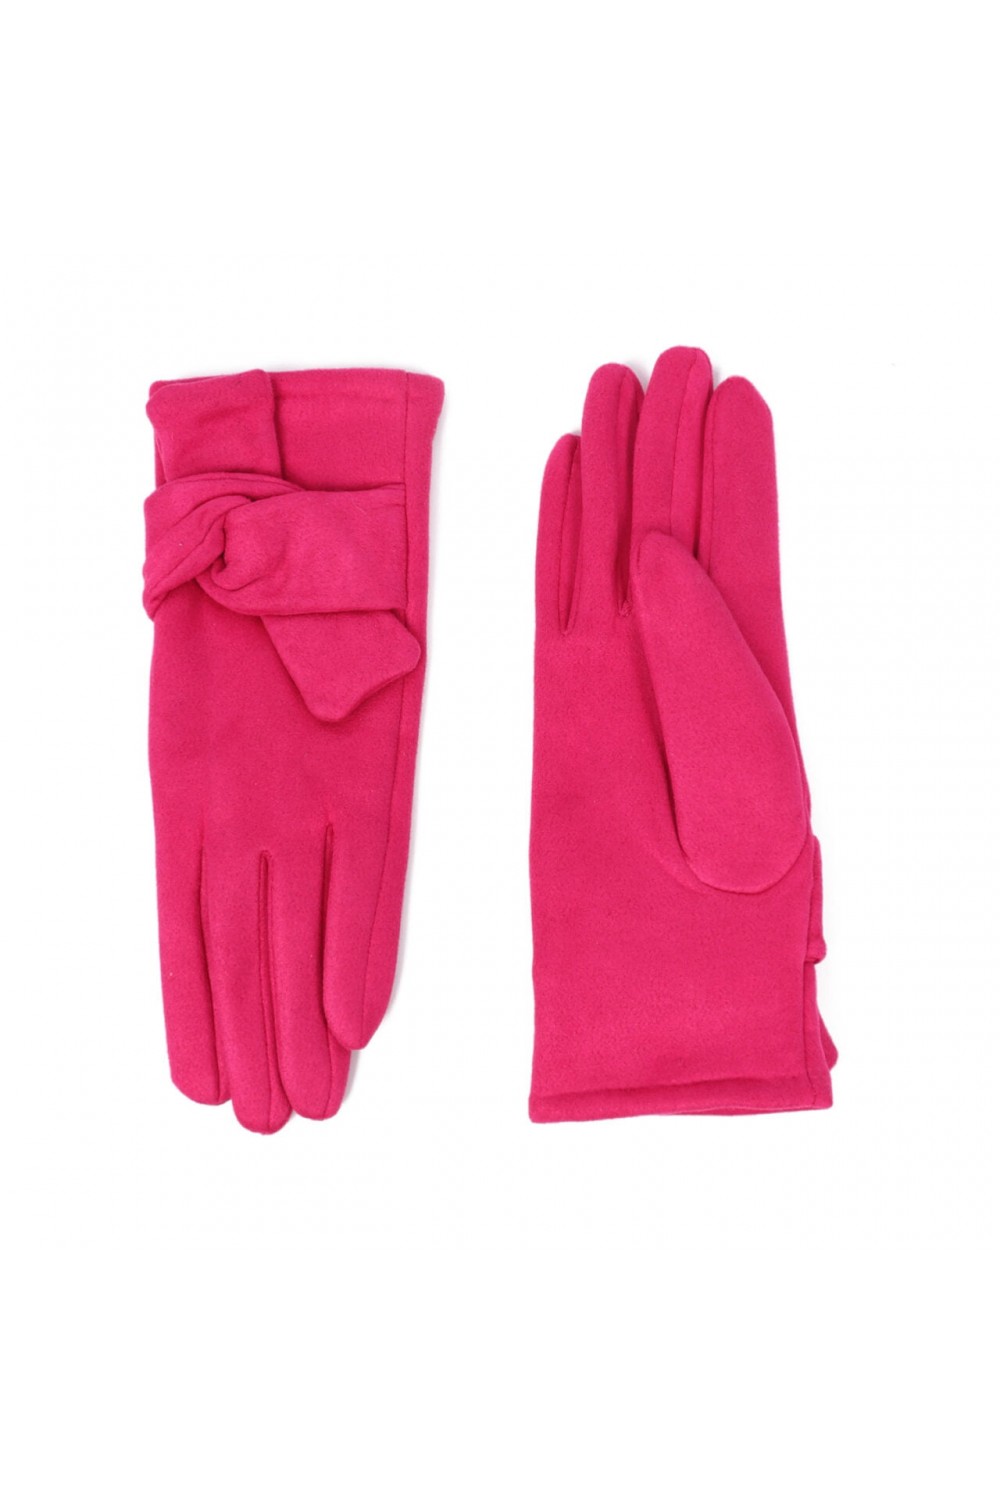 Zelly Tied Back Glove Hot Pink